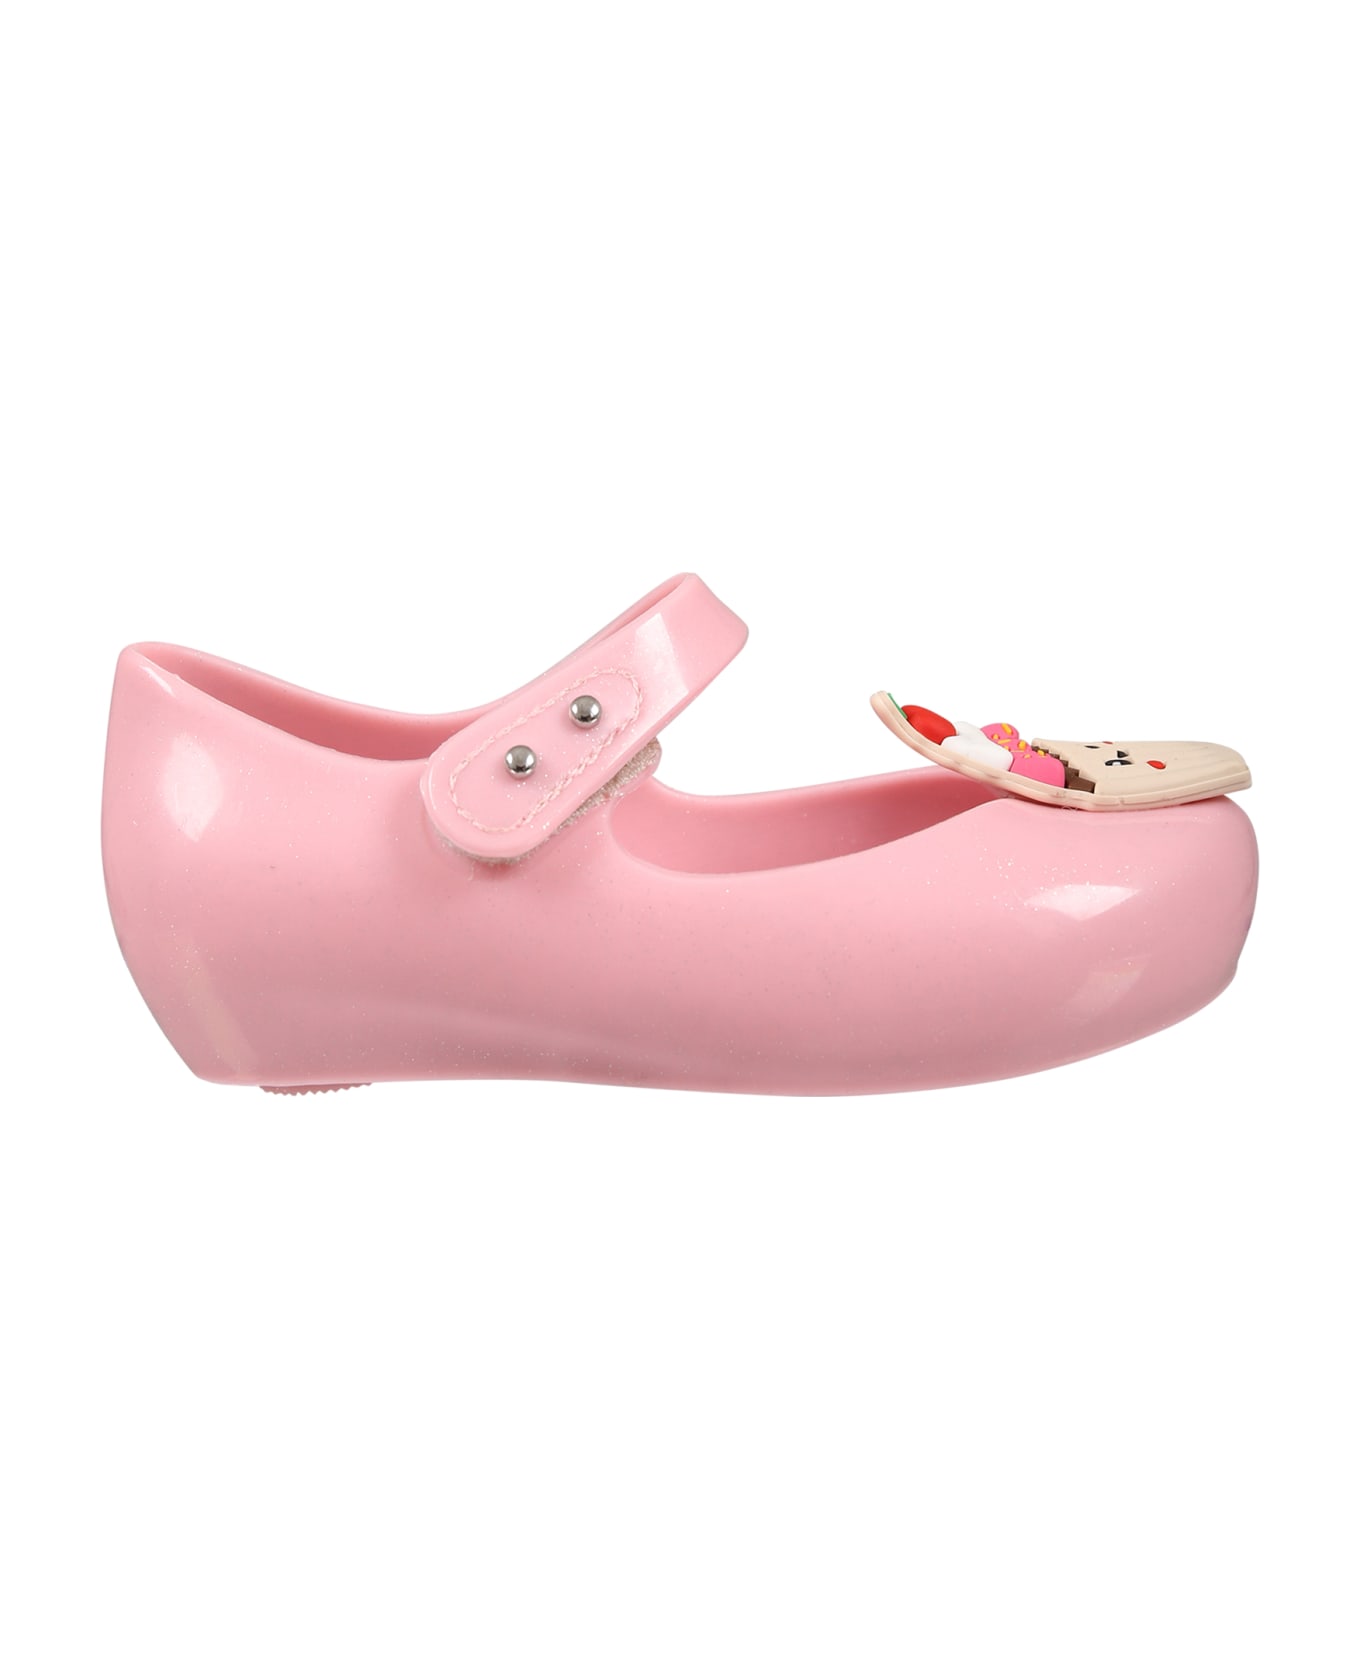 Melissa Pink Ballet Flats For Girl With Cupcake - Pink シューズ